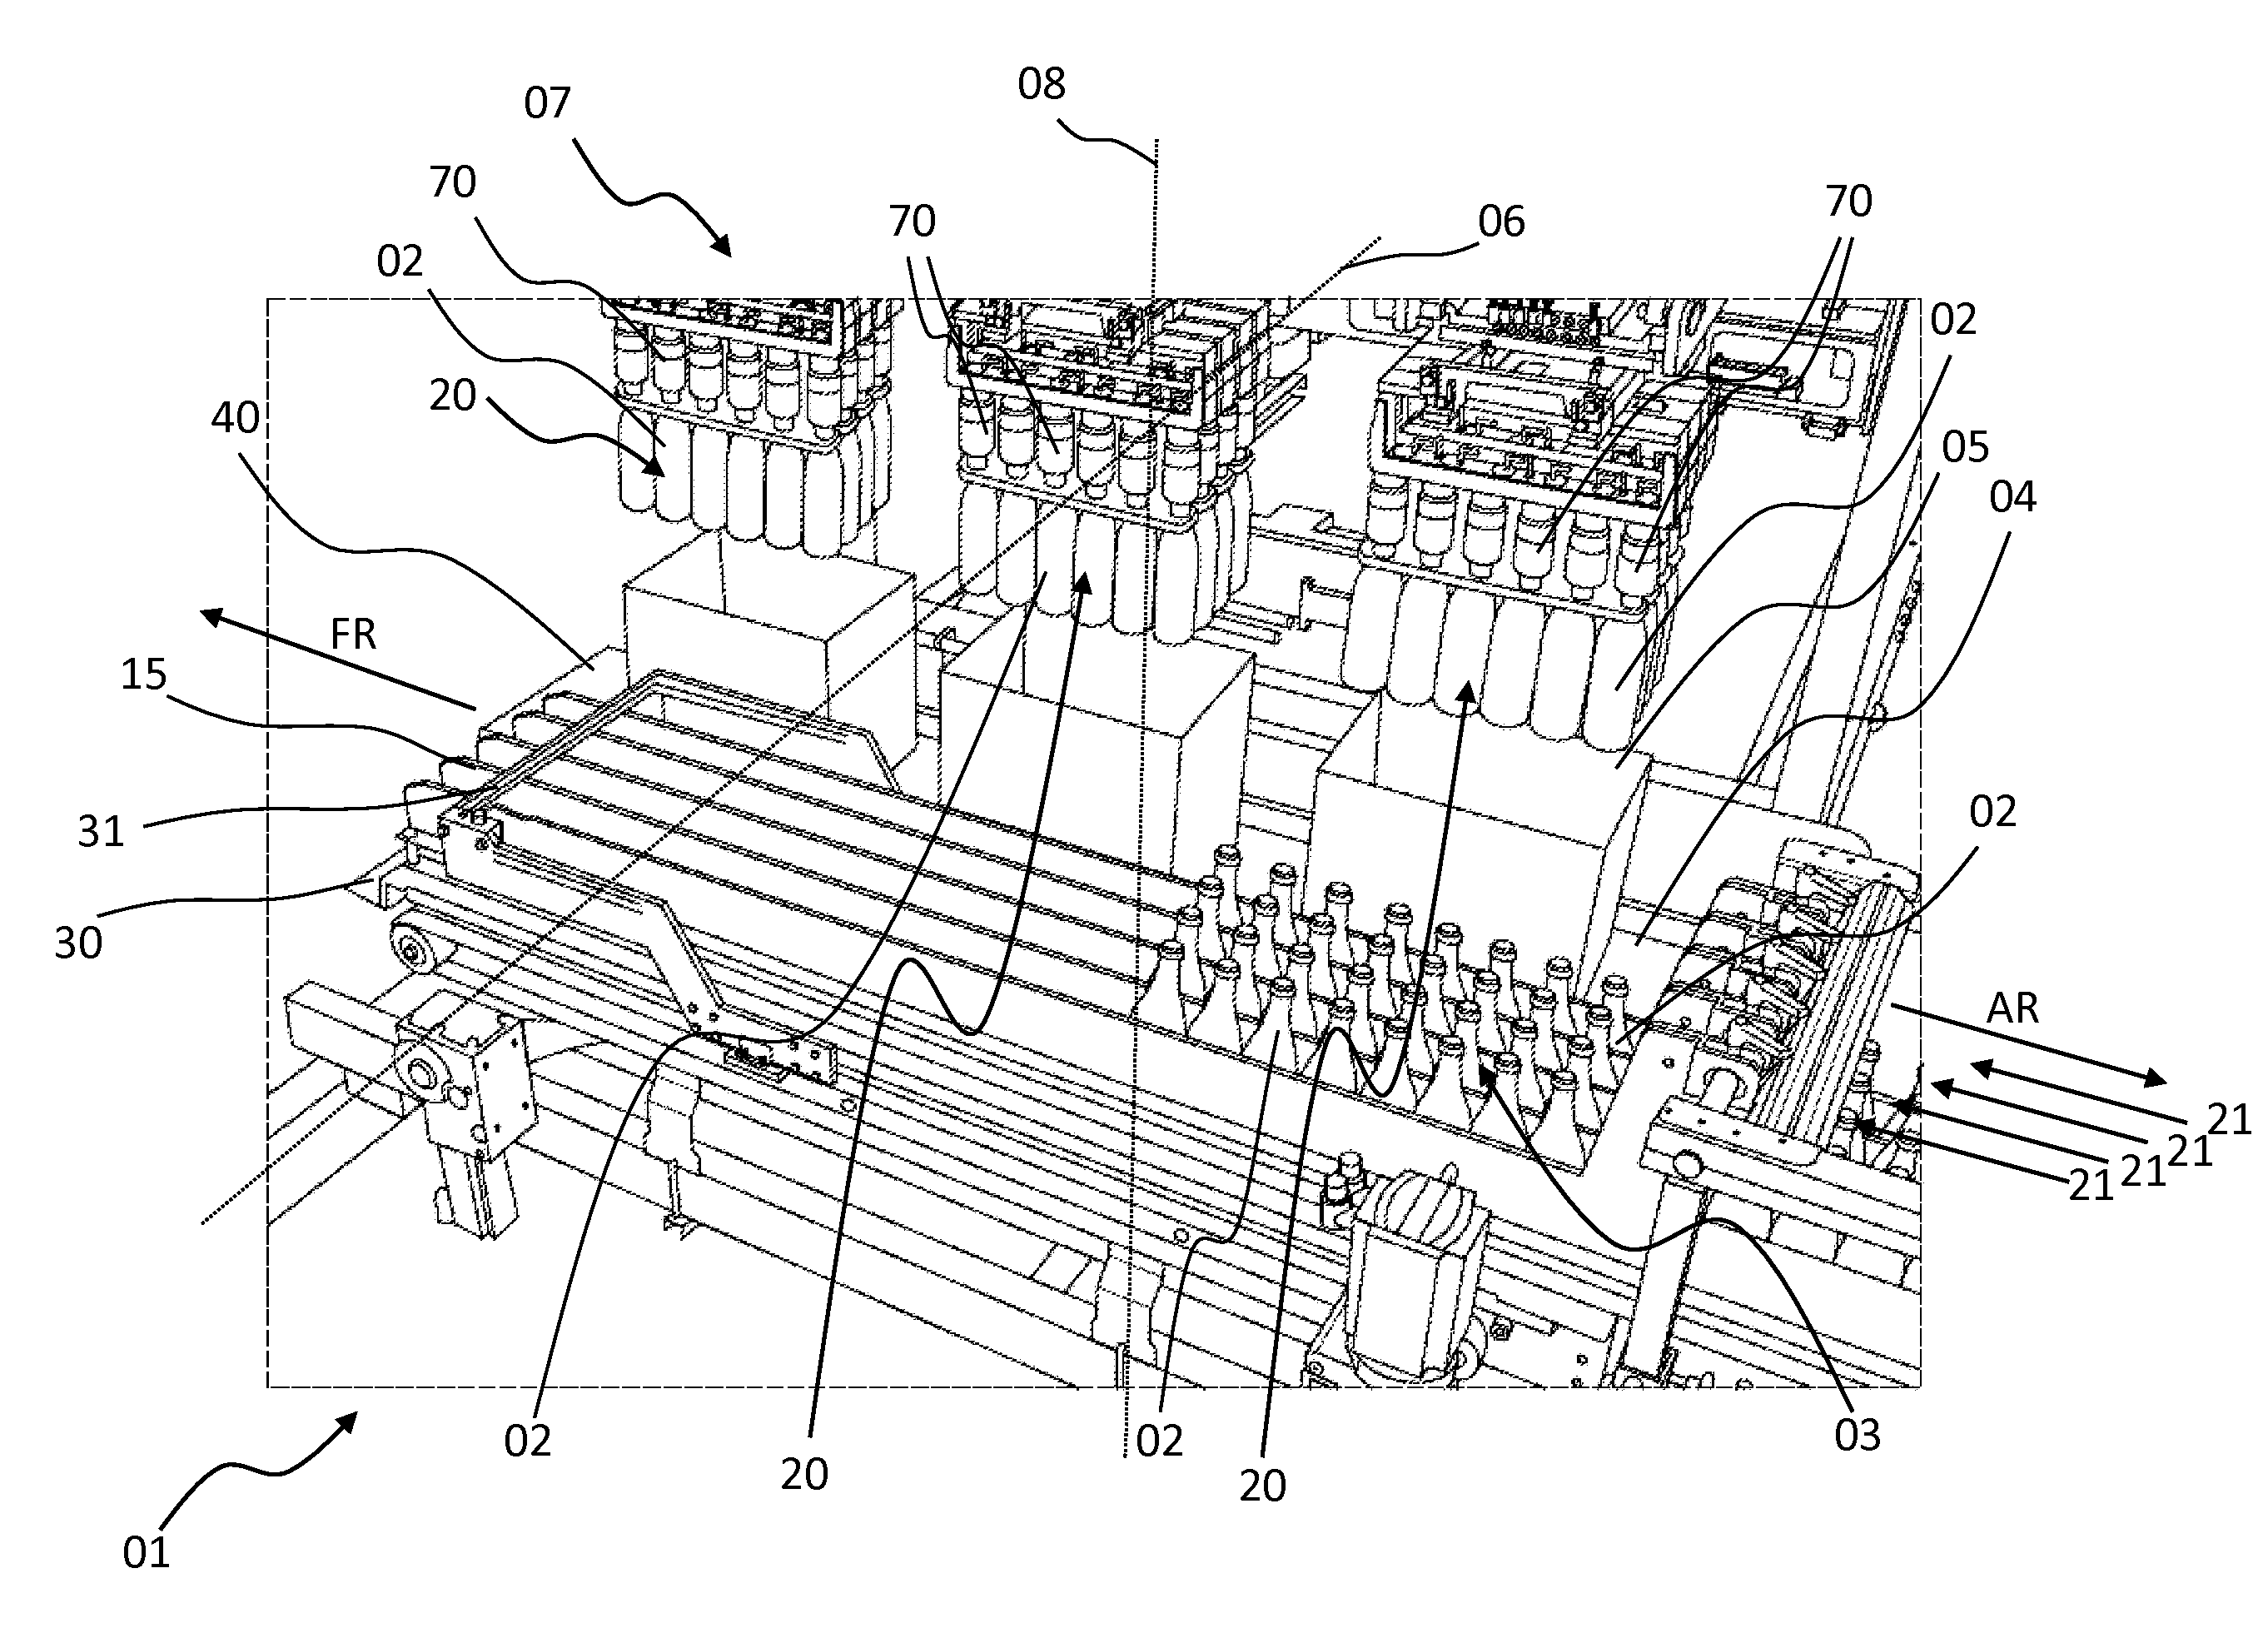 Apparatus and method for handling articles